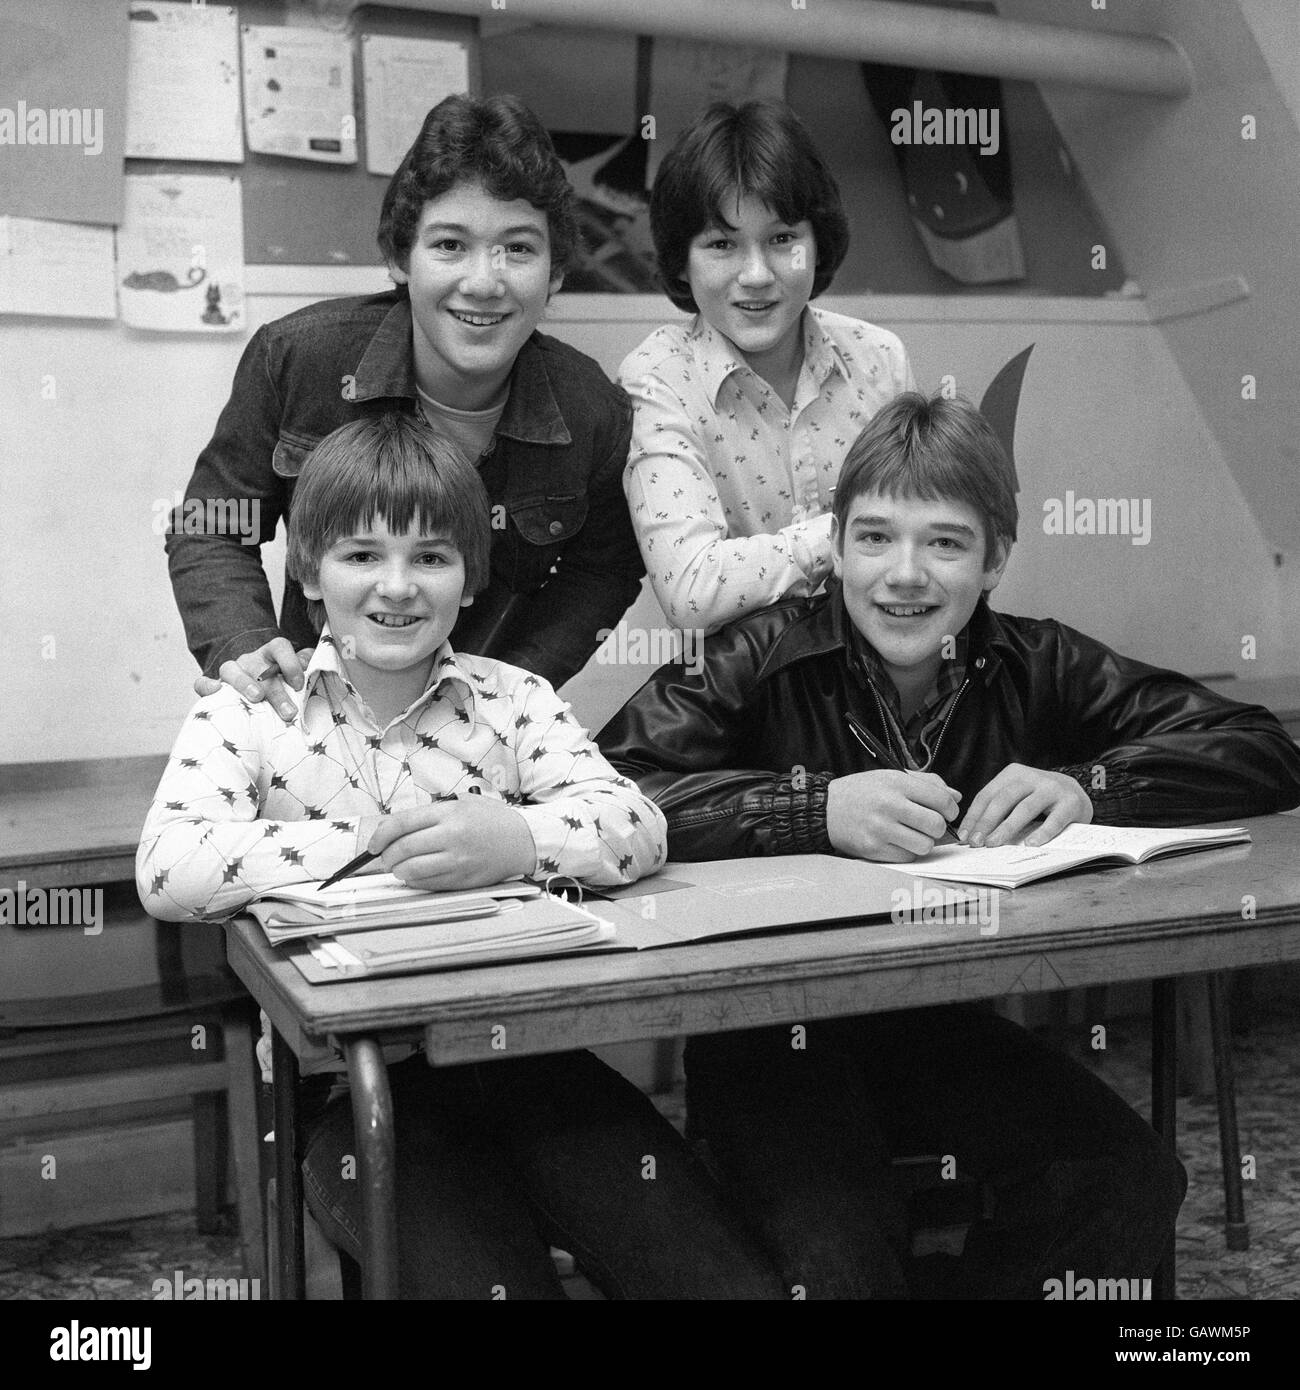 Members of the top teeny pop group 'Our Kid', ordered back to school by education authorities, in class at the Italia Conti School, London. From left: Kevin Rowan,13, Terry McCreith, 15, Terry Baccino, 16, and Brian Farrell. Stock Photo